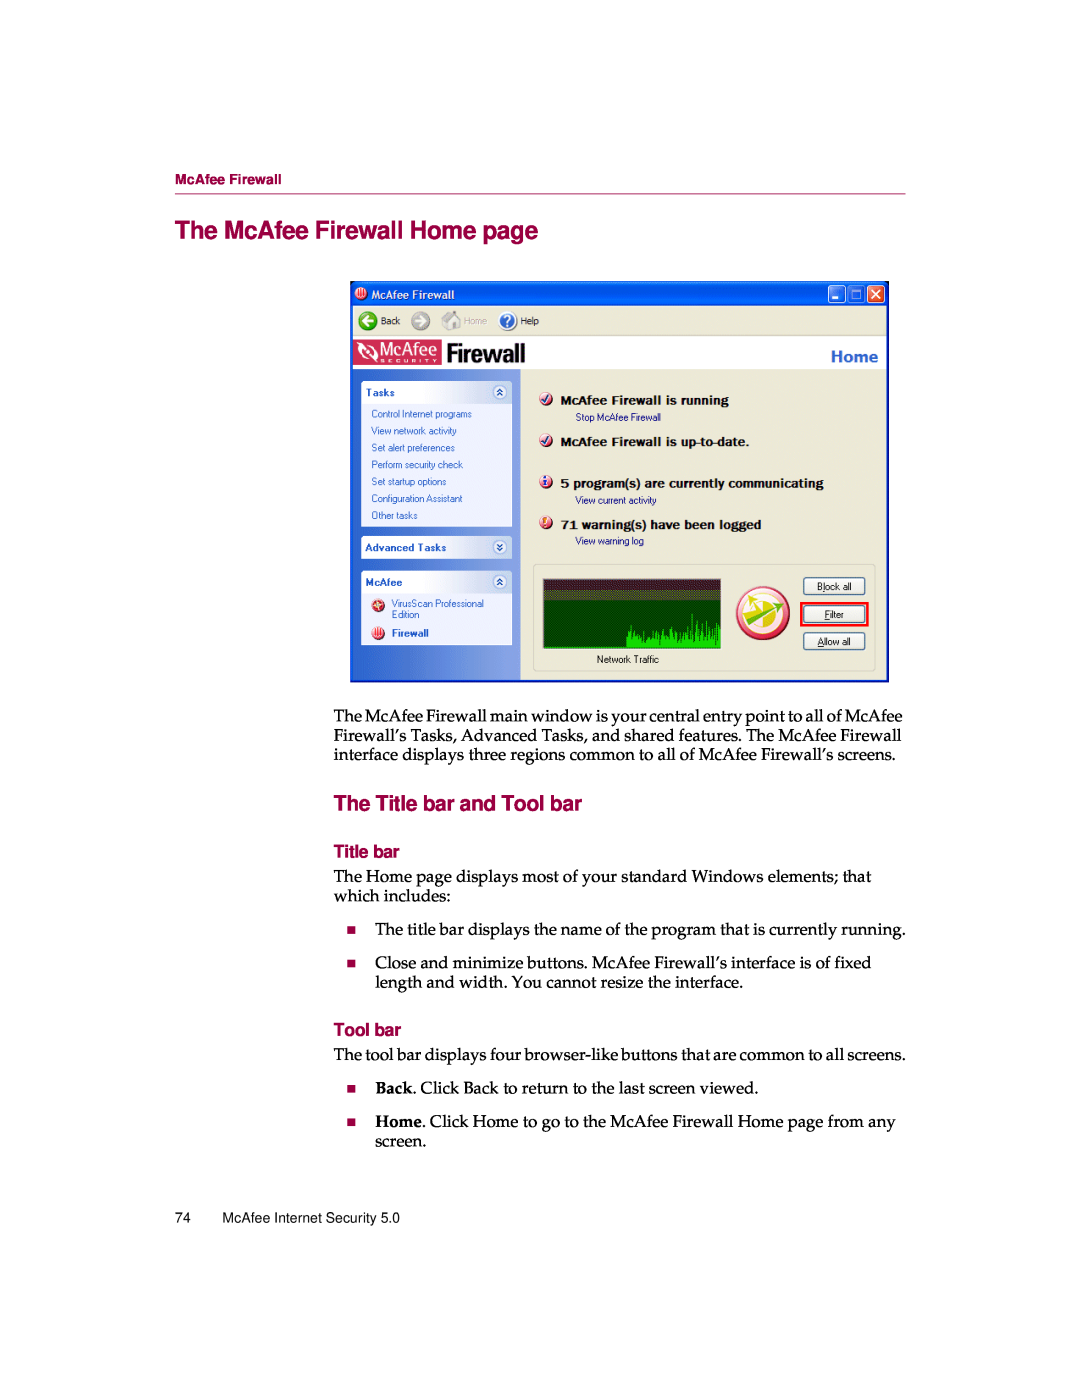 McAfee 5 manual The McAfee Firewall Home page, The Title bar and Tool bar 